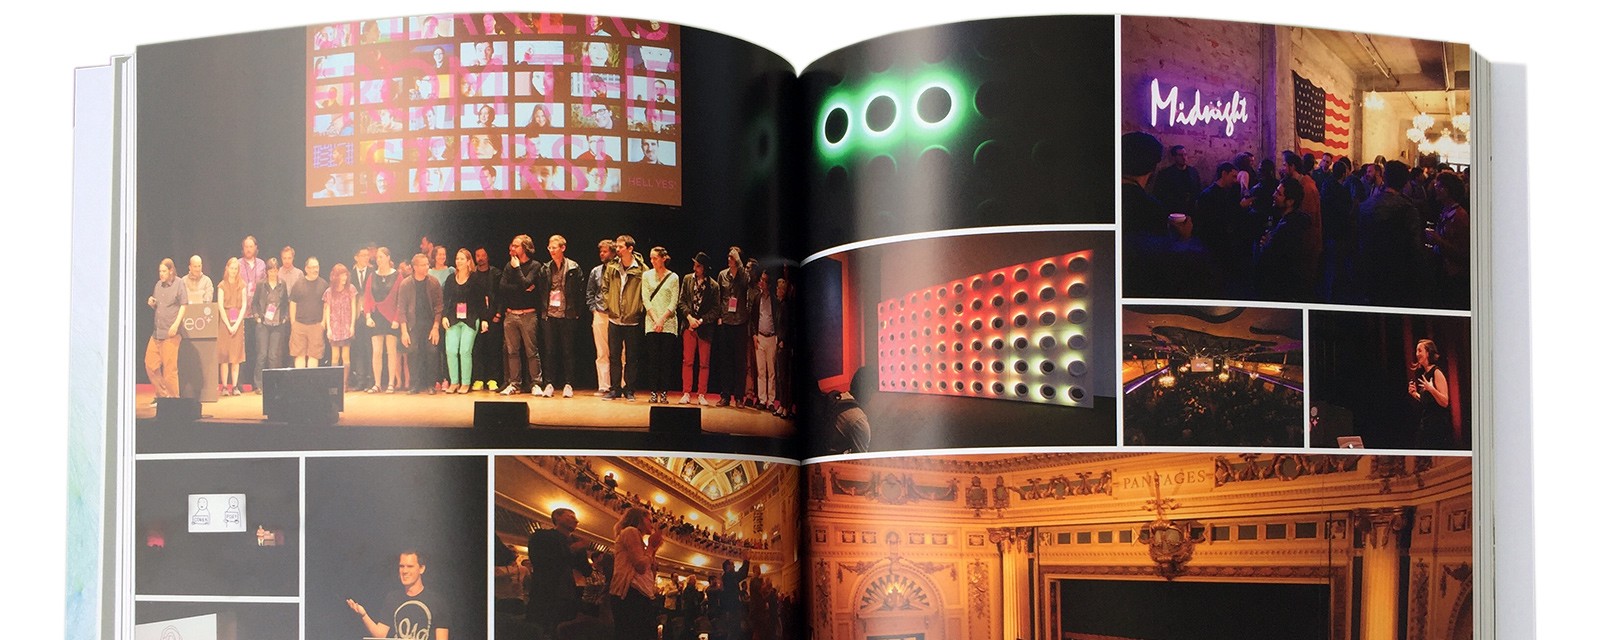 A picture of an open book, showing photographs of the EYEO event.